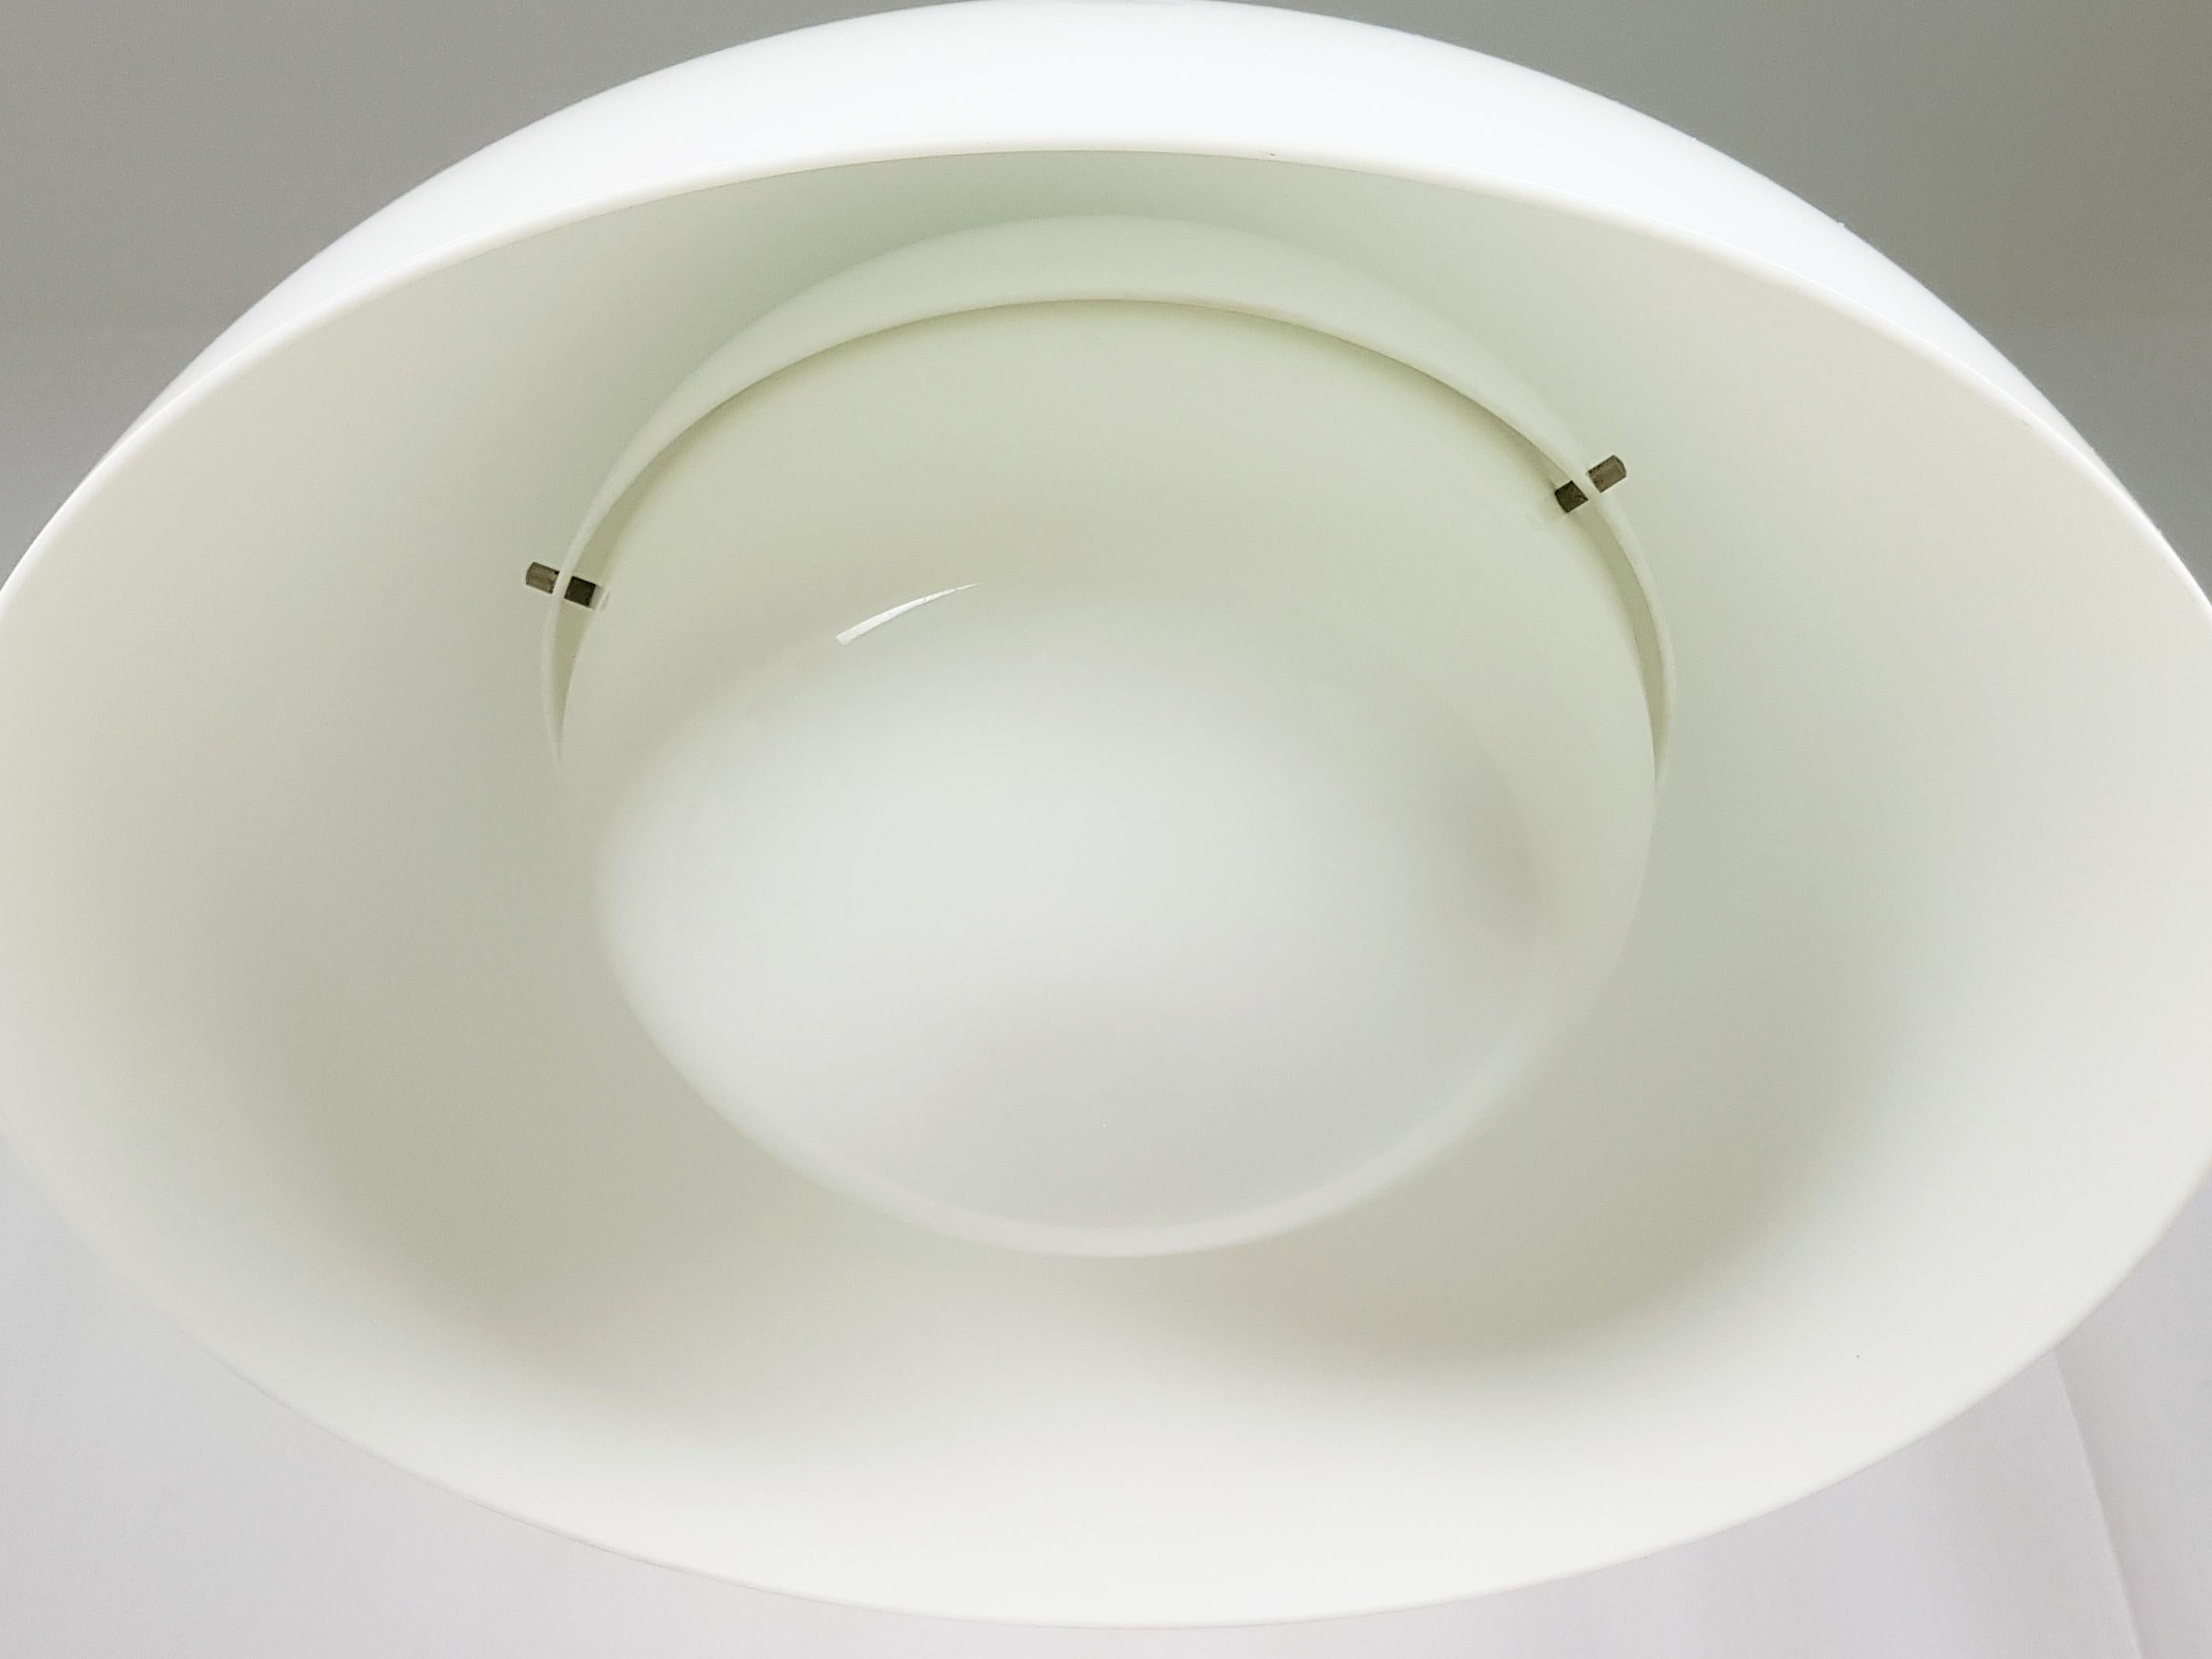 White methacrylate double shades with nickel plated brass finishes.
Original working wiring with 1 E27 lamp socket.
Overall very good condition: the upper crown element is missing.